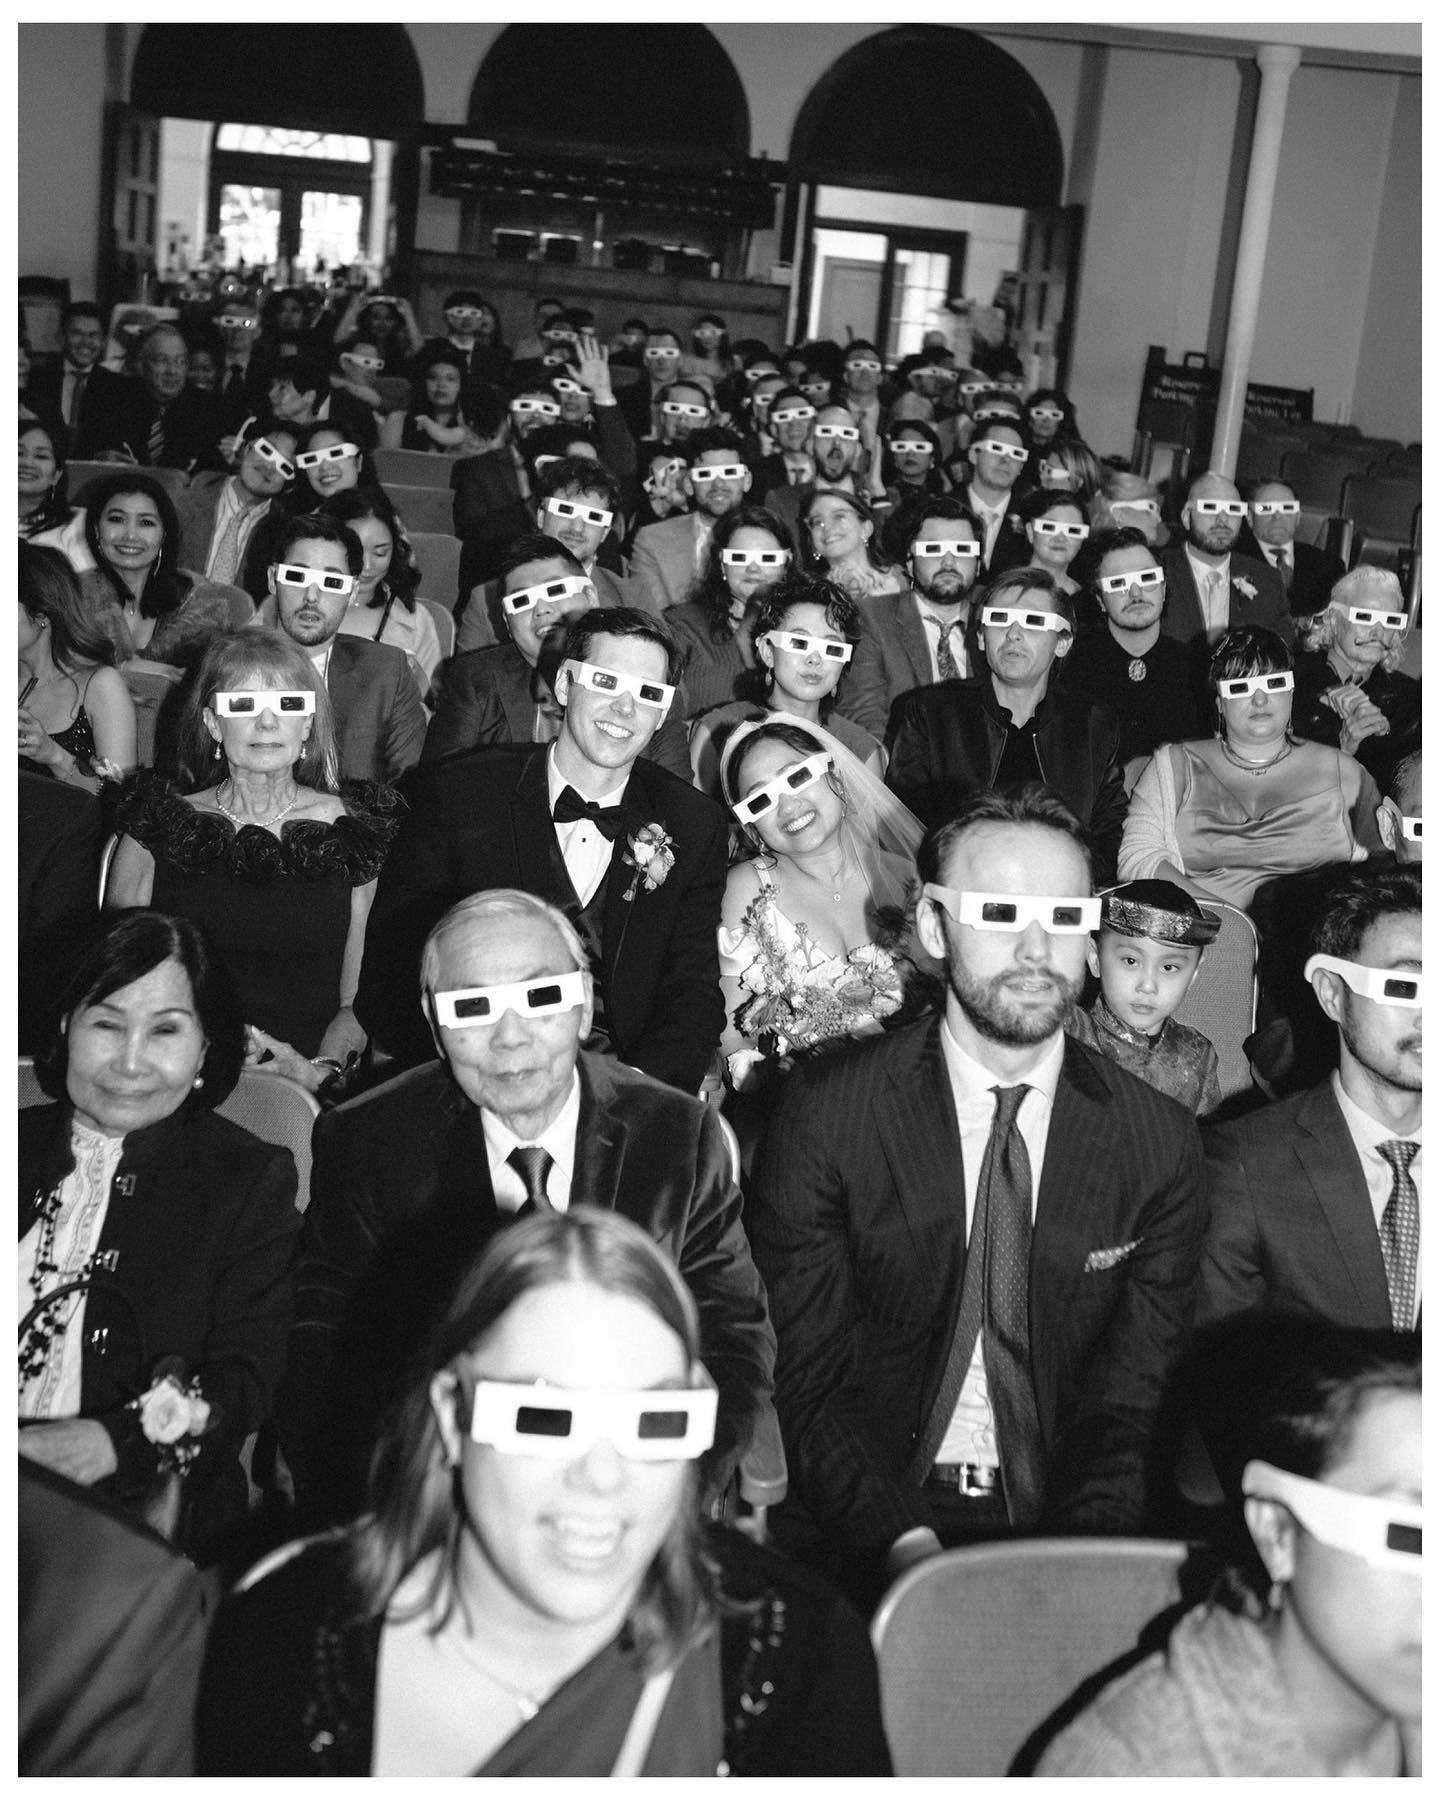 Happy solar eclipse day, don't forget your protective gear 😎 🌝 🌞 

(Photo taken at Anh &amp; John's Wedding Day, recreating a famous image from 1952)